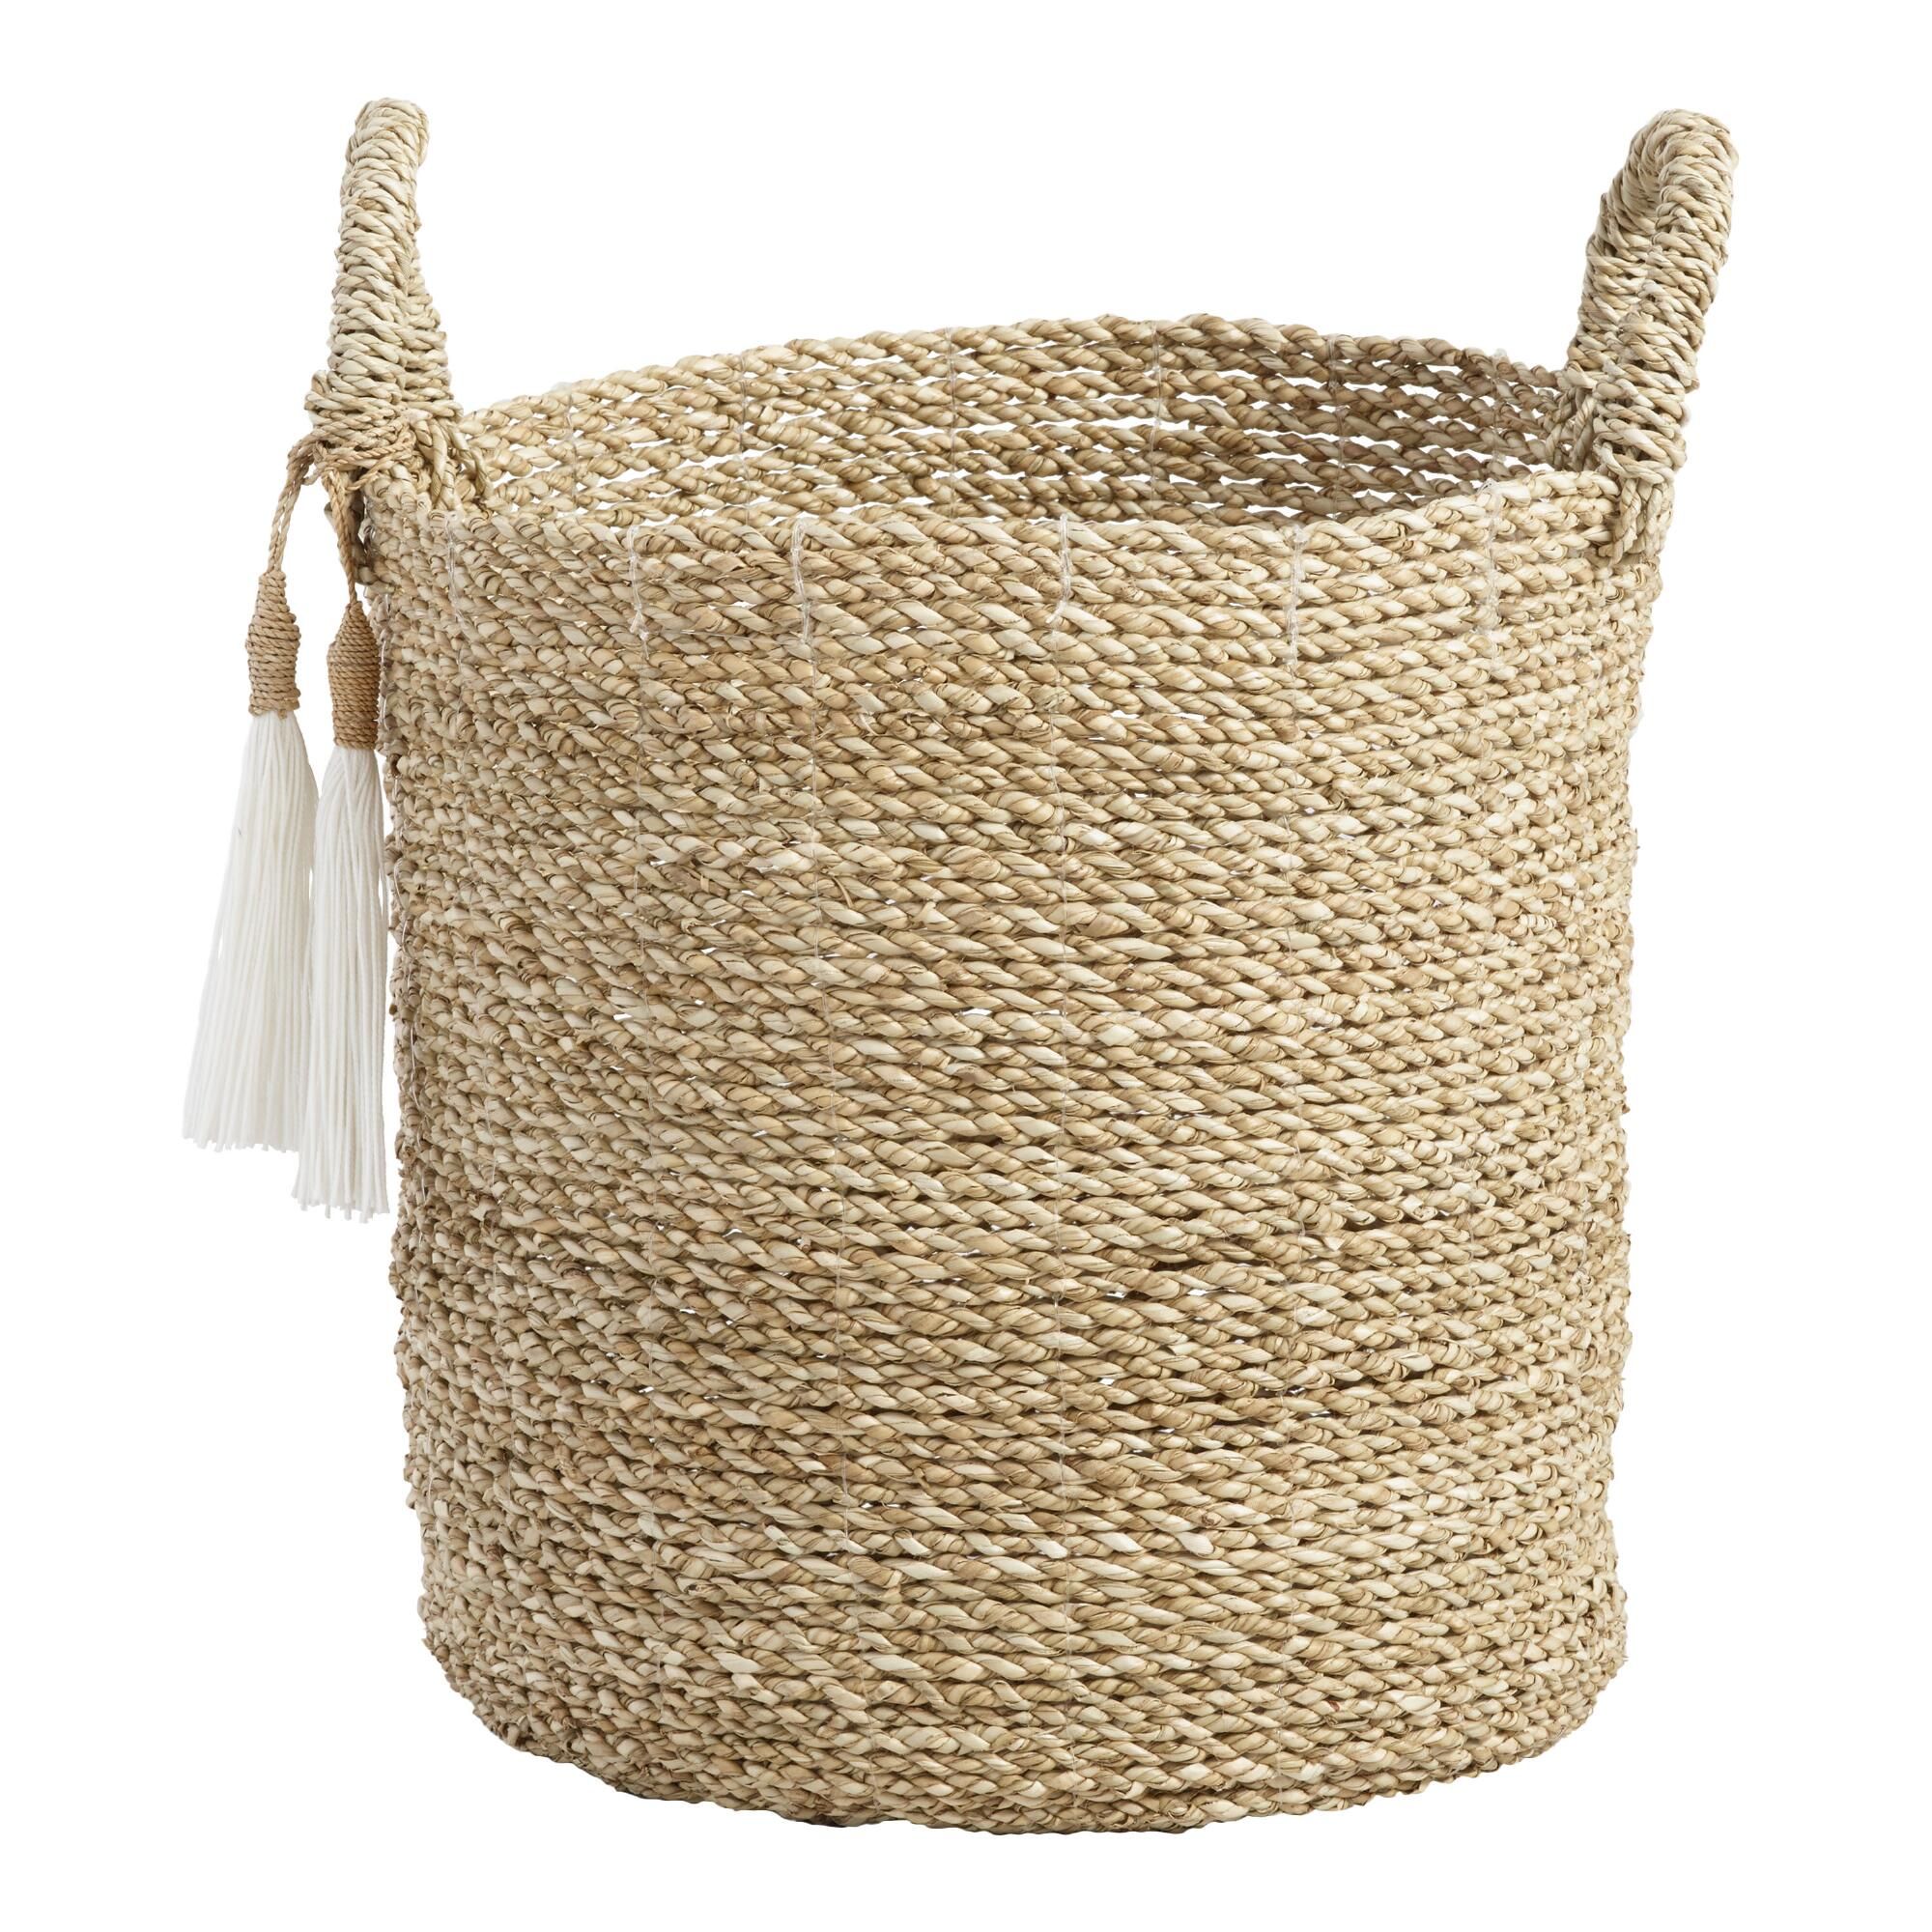 Small Seagrass Delilah Tote Basket with Tassels by World Market | World Market